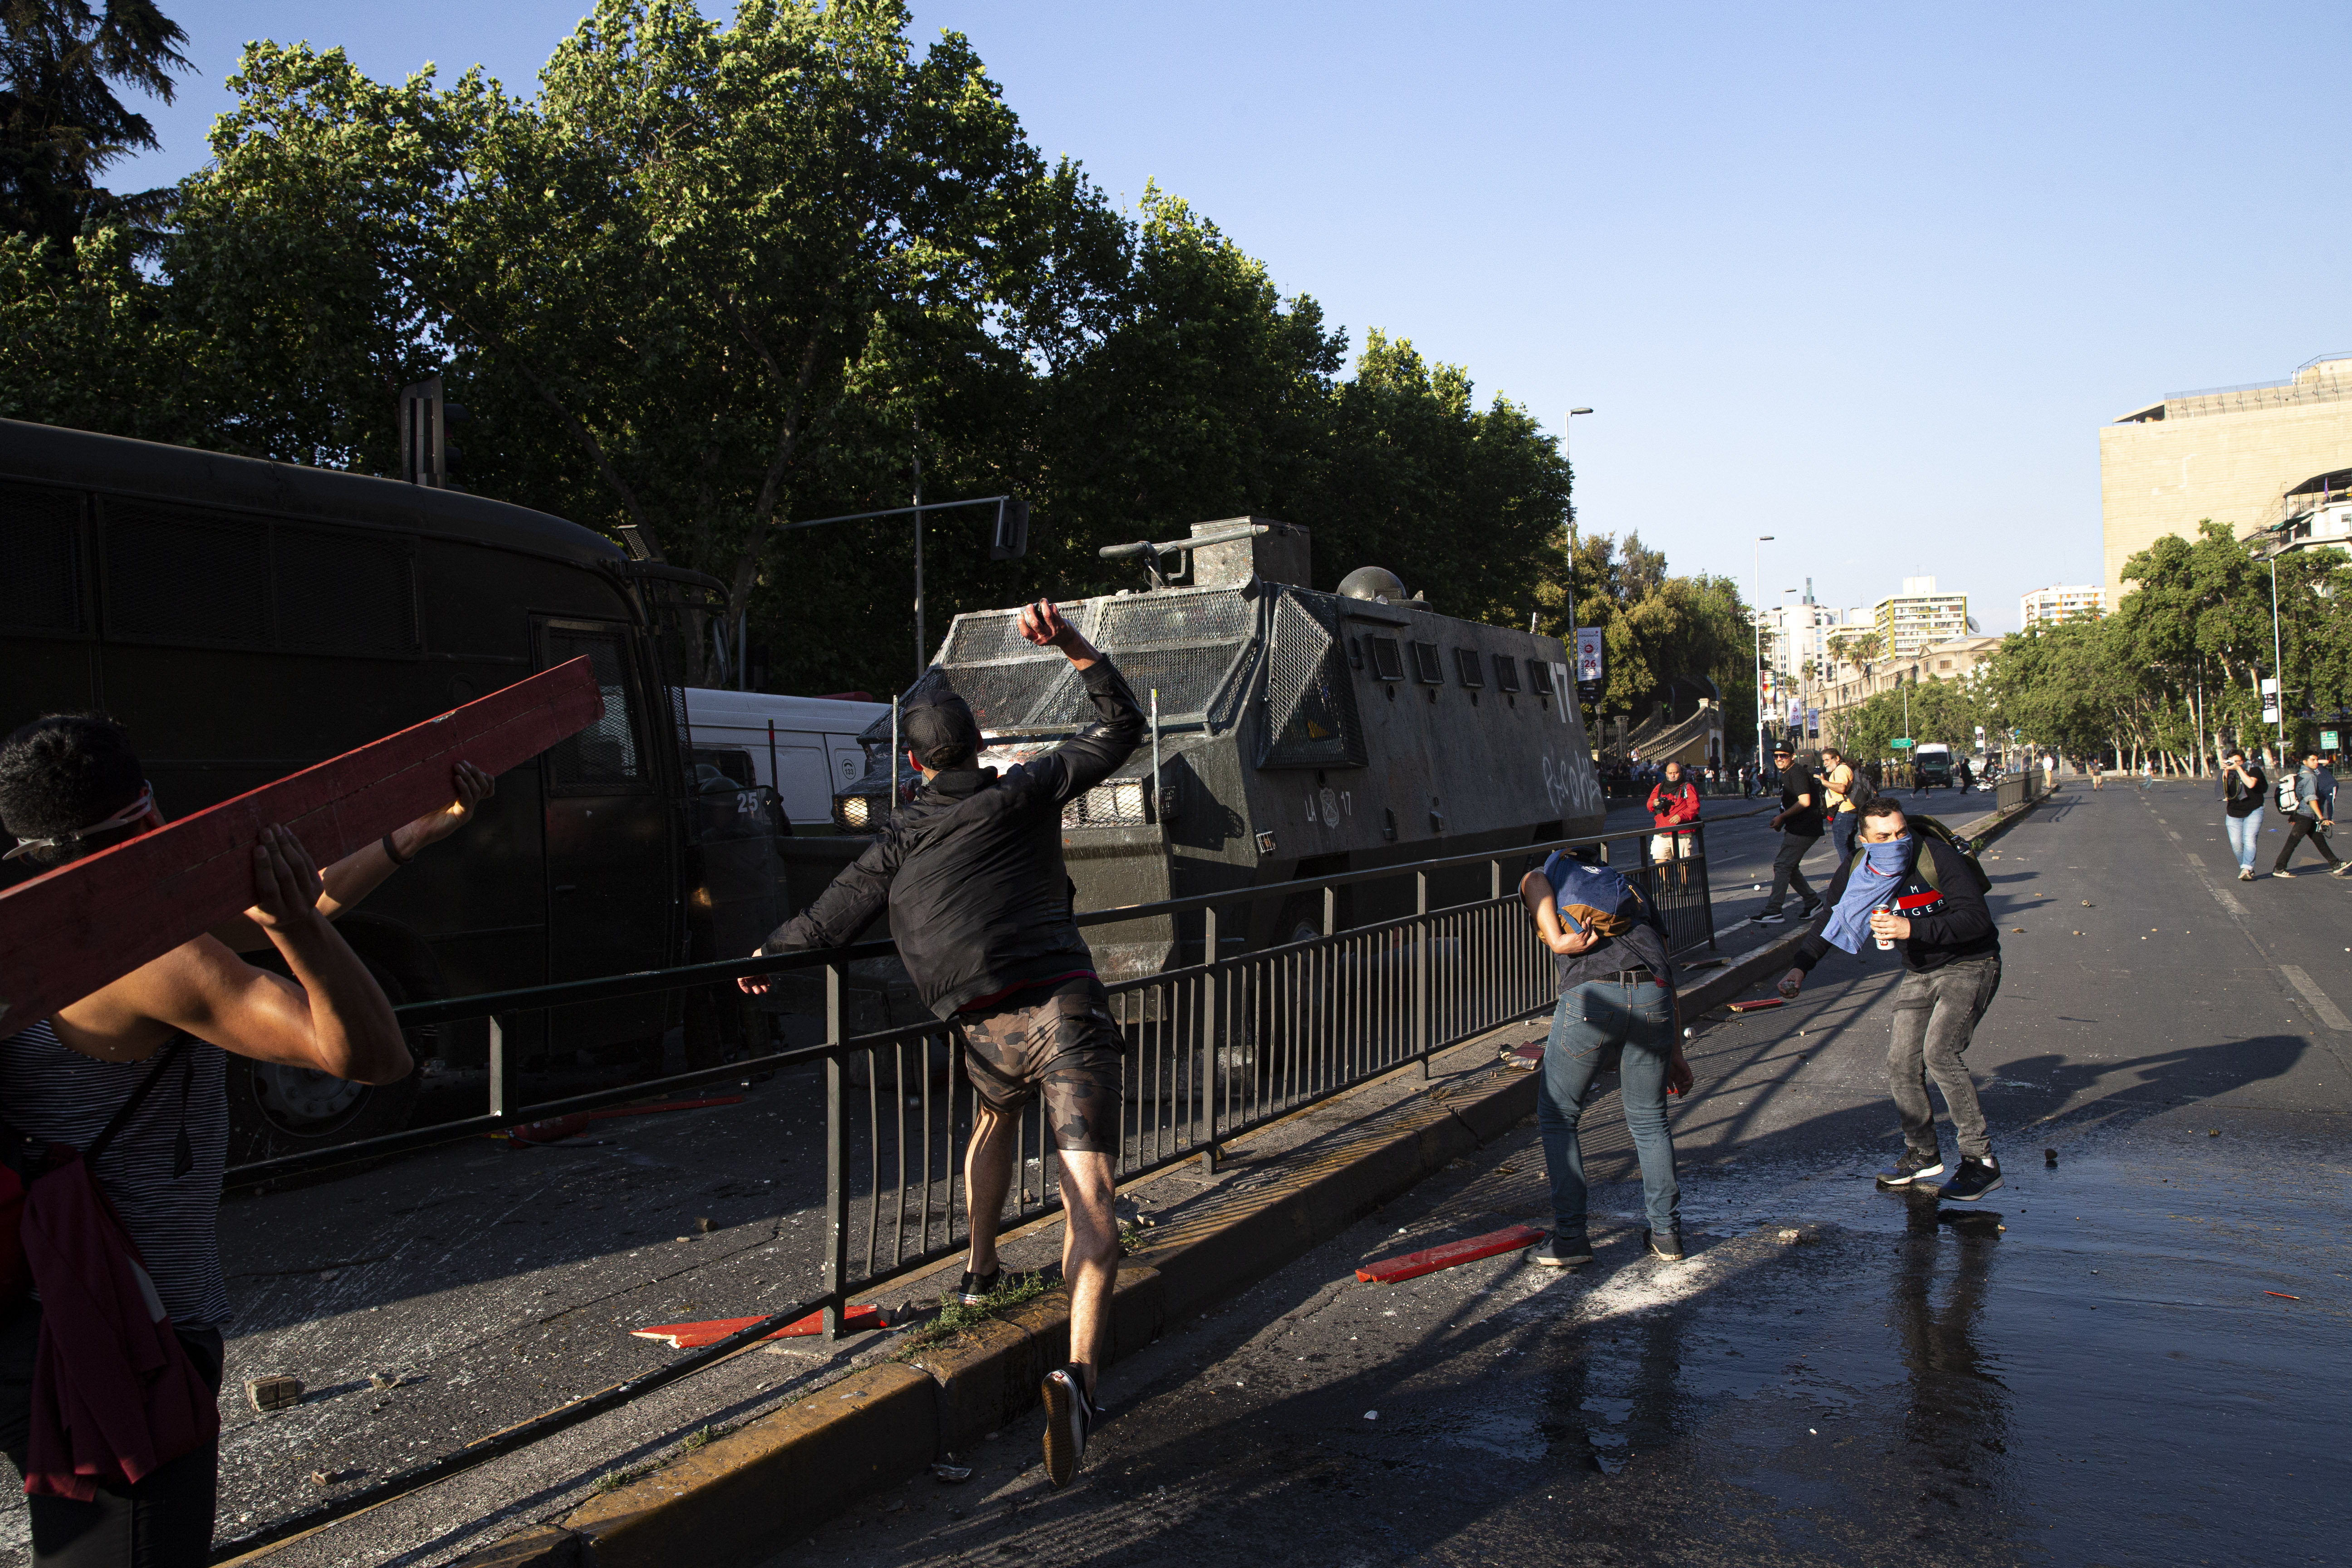 A protester throws a rock at a water cannon during clashes with police in front of the Santa Lucia subway station during a protest against the rising cost of subway and bus fares, in Santiago, Friday, Oct. 18, 2019. (AP Photo/Esteban Felix)